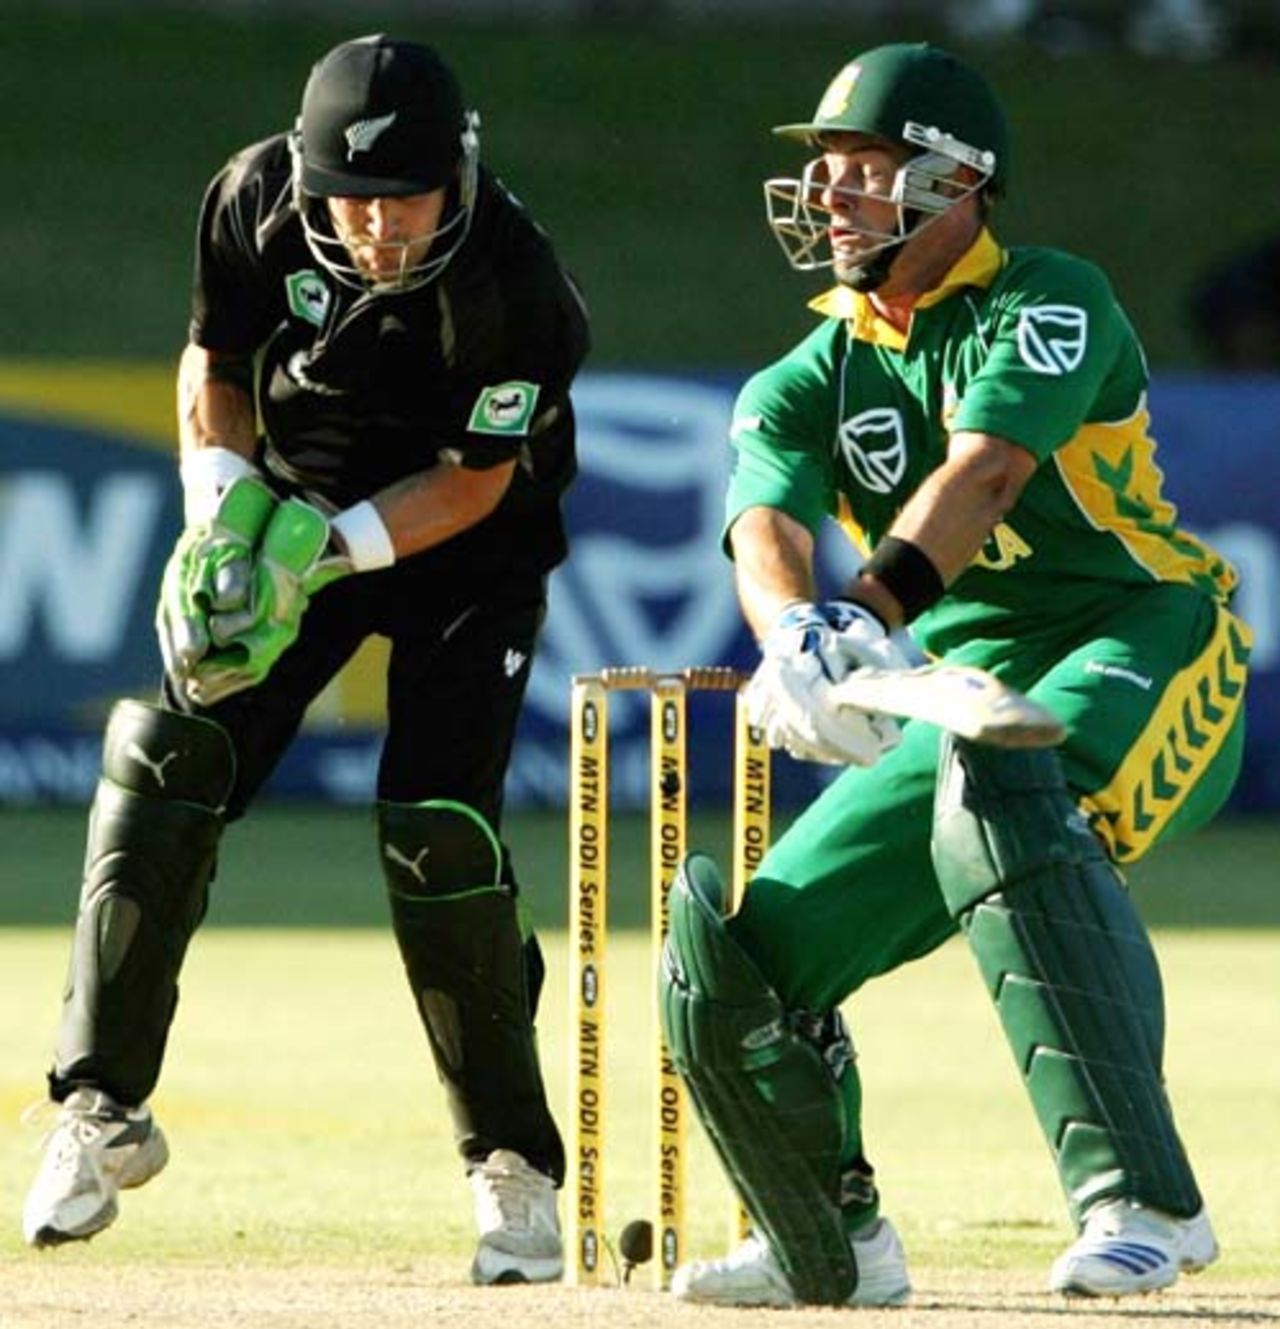 Mark Boucher's 90-run stand with Shaun Pollock led South Africa's recovery, South Africa v New Zealand, 2nd ODI, Port Elizabeth, November 30, 2007